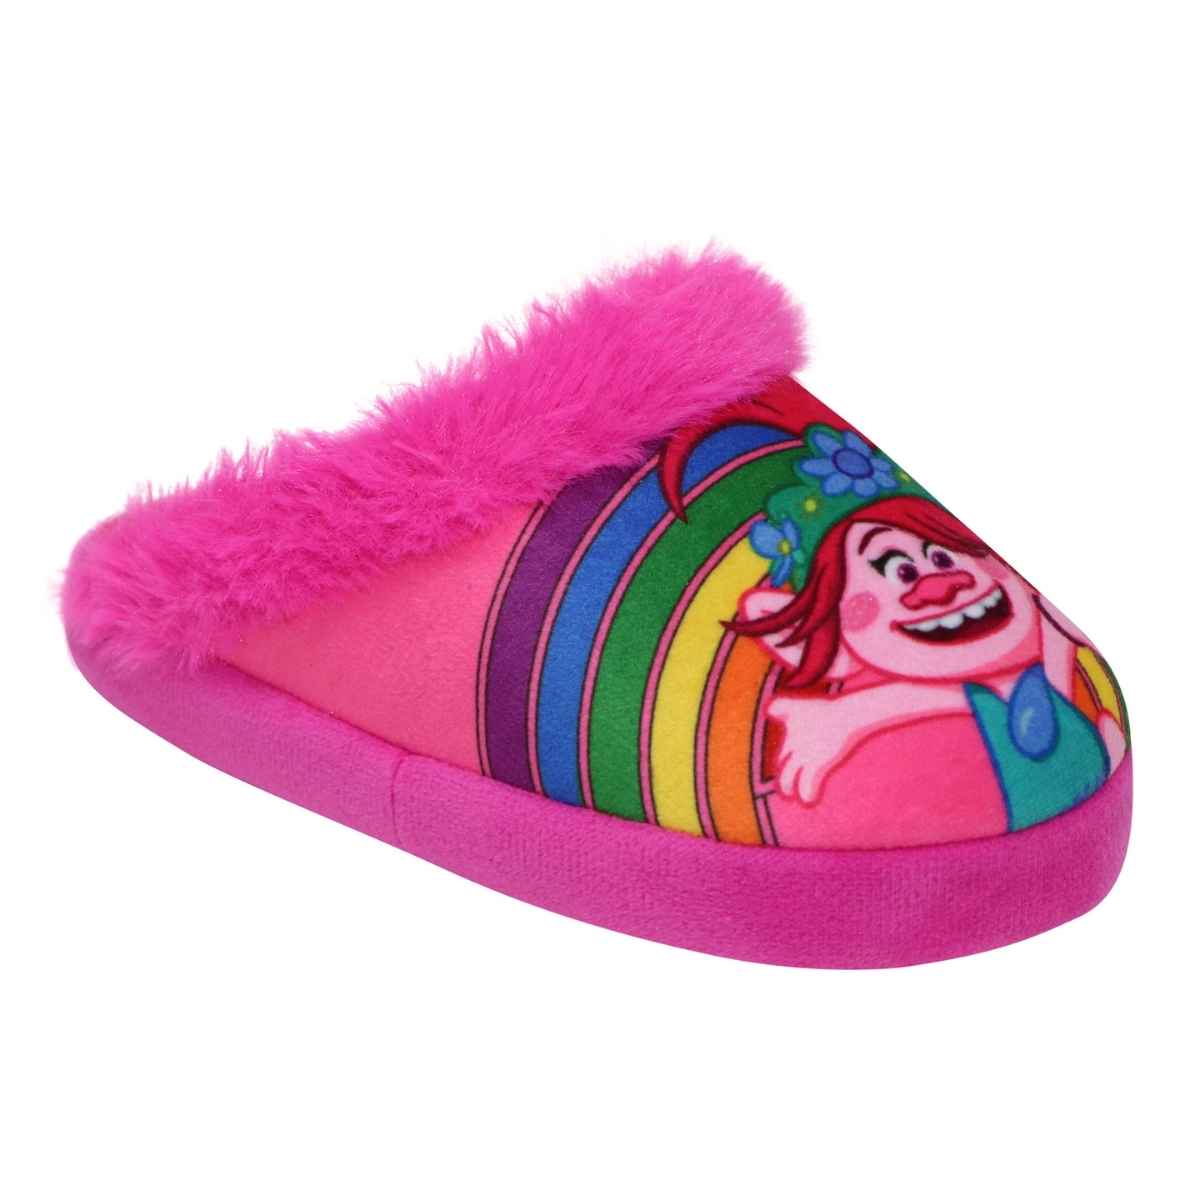 12 Trolls Shoes to Get Kids Ready for DreamWorks Animated Movie  Footwear  News